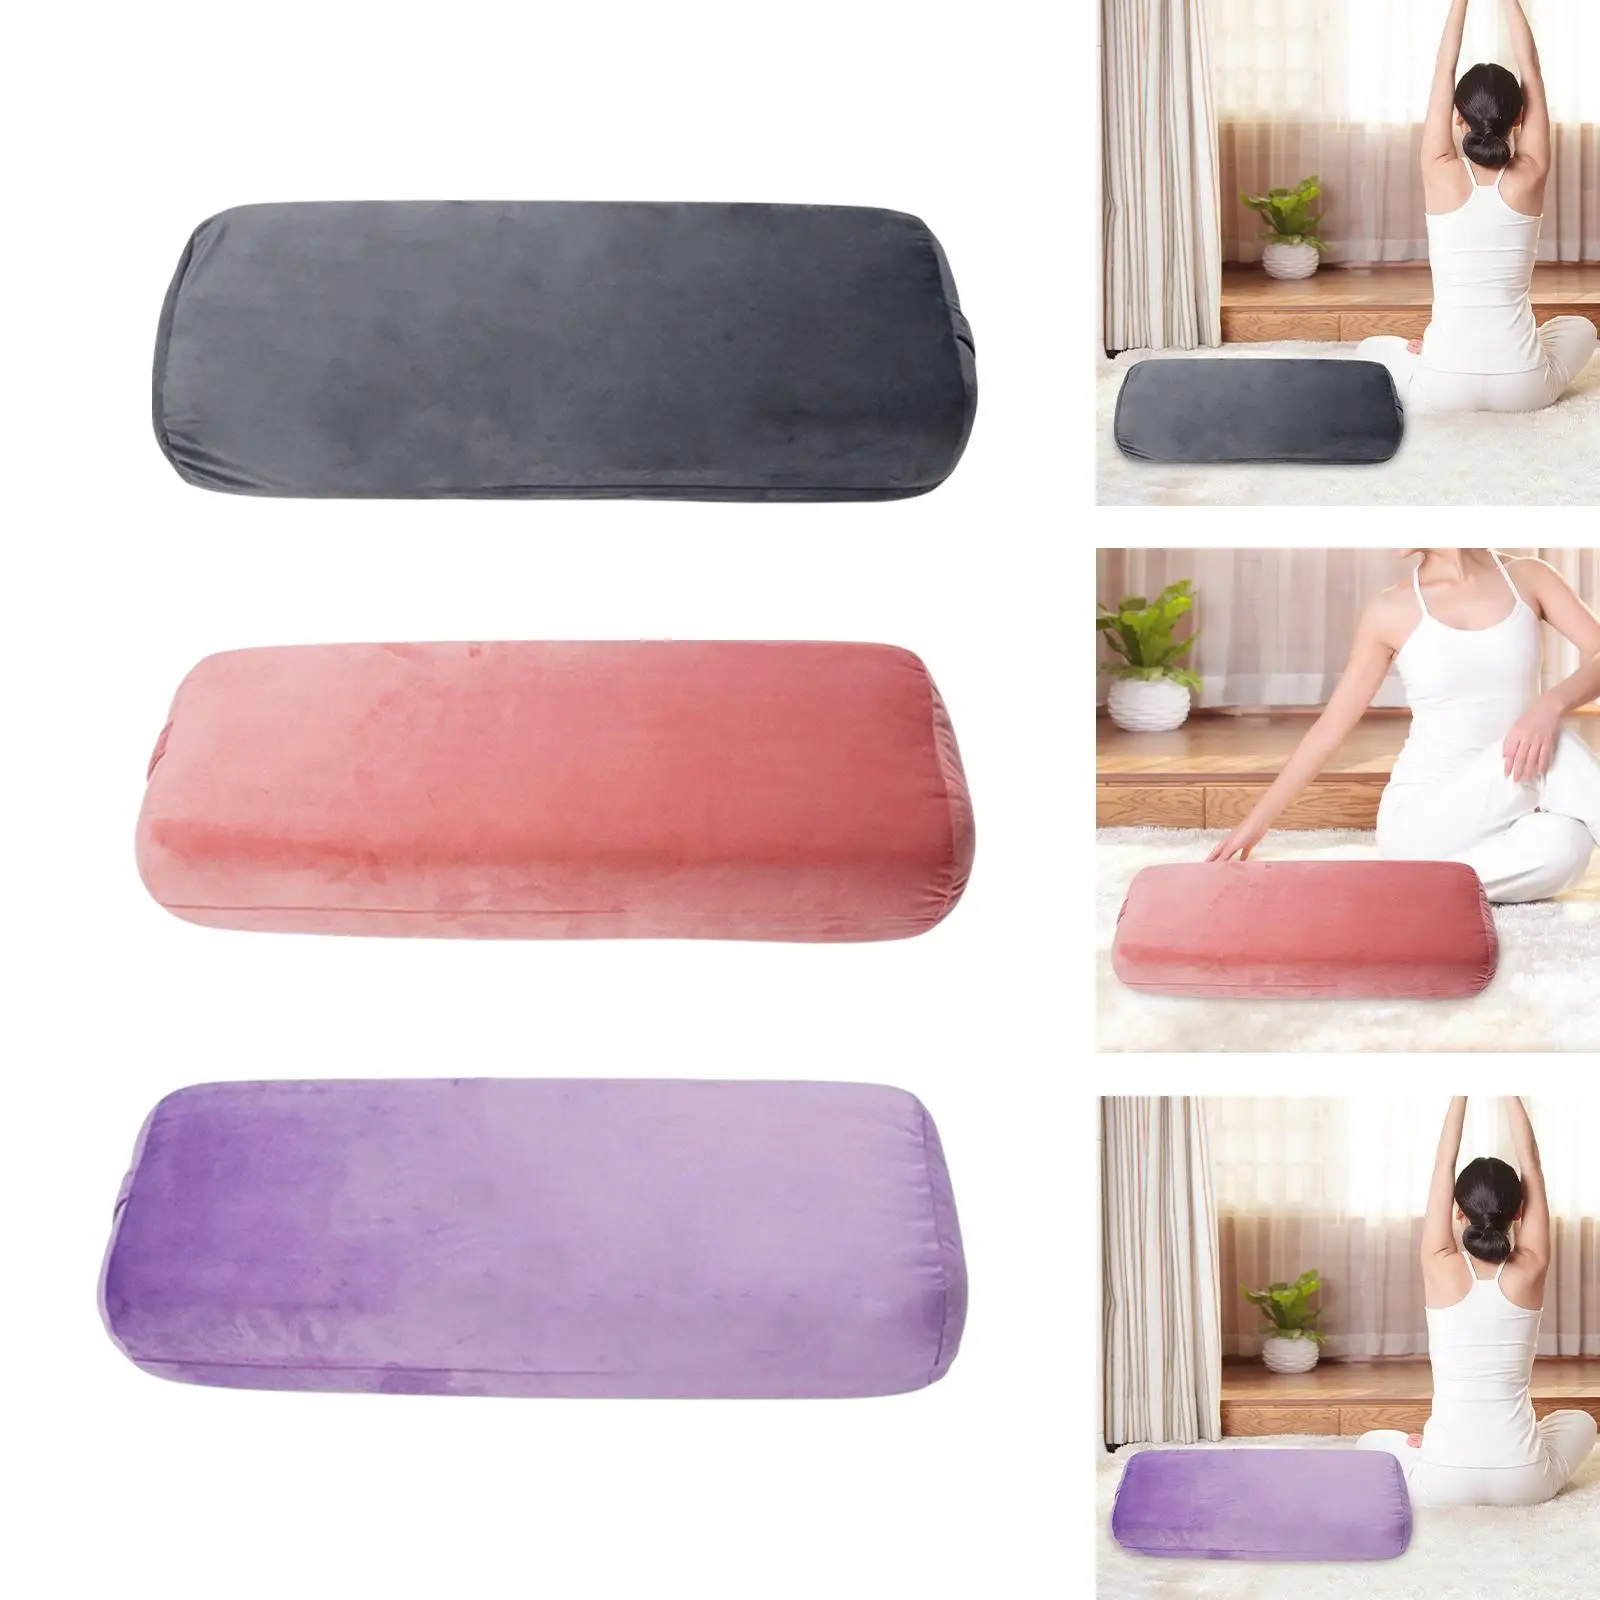 Yoga Accessories Cushion Yoga Bolster Pillow for Support Restorative Yoga